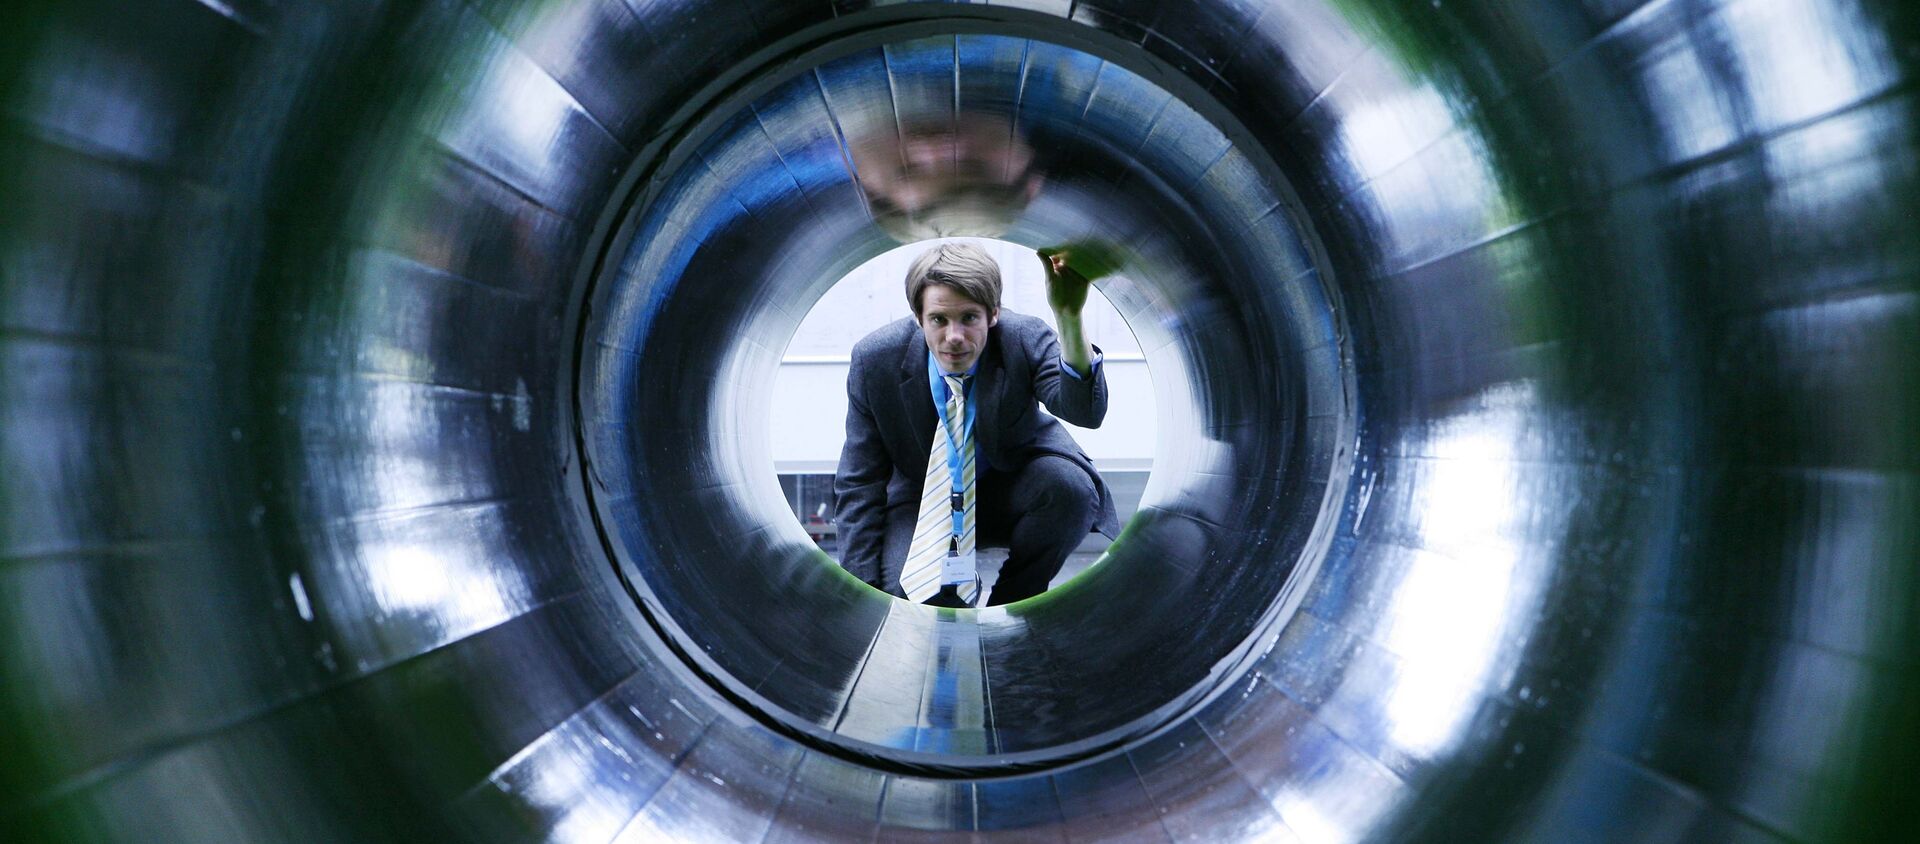 A man looks into a tube representing a natural gas pipeline at the booth of Nord Stream at the Hanover industrial fair in Hanover, Germany (File) - Sputnik International, 1920, 01.05.2018